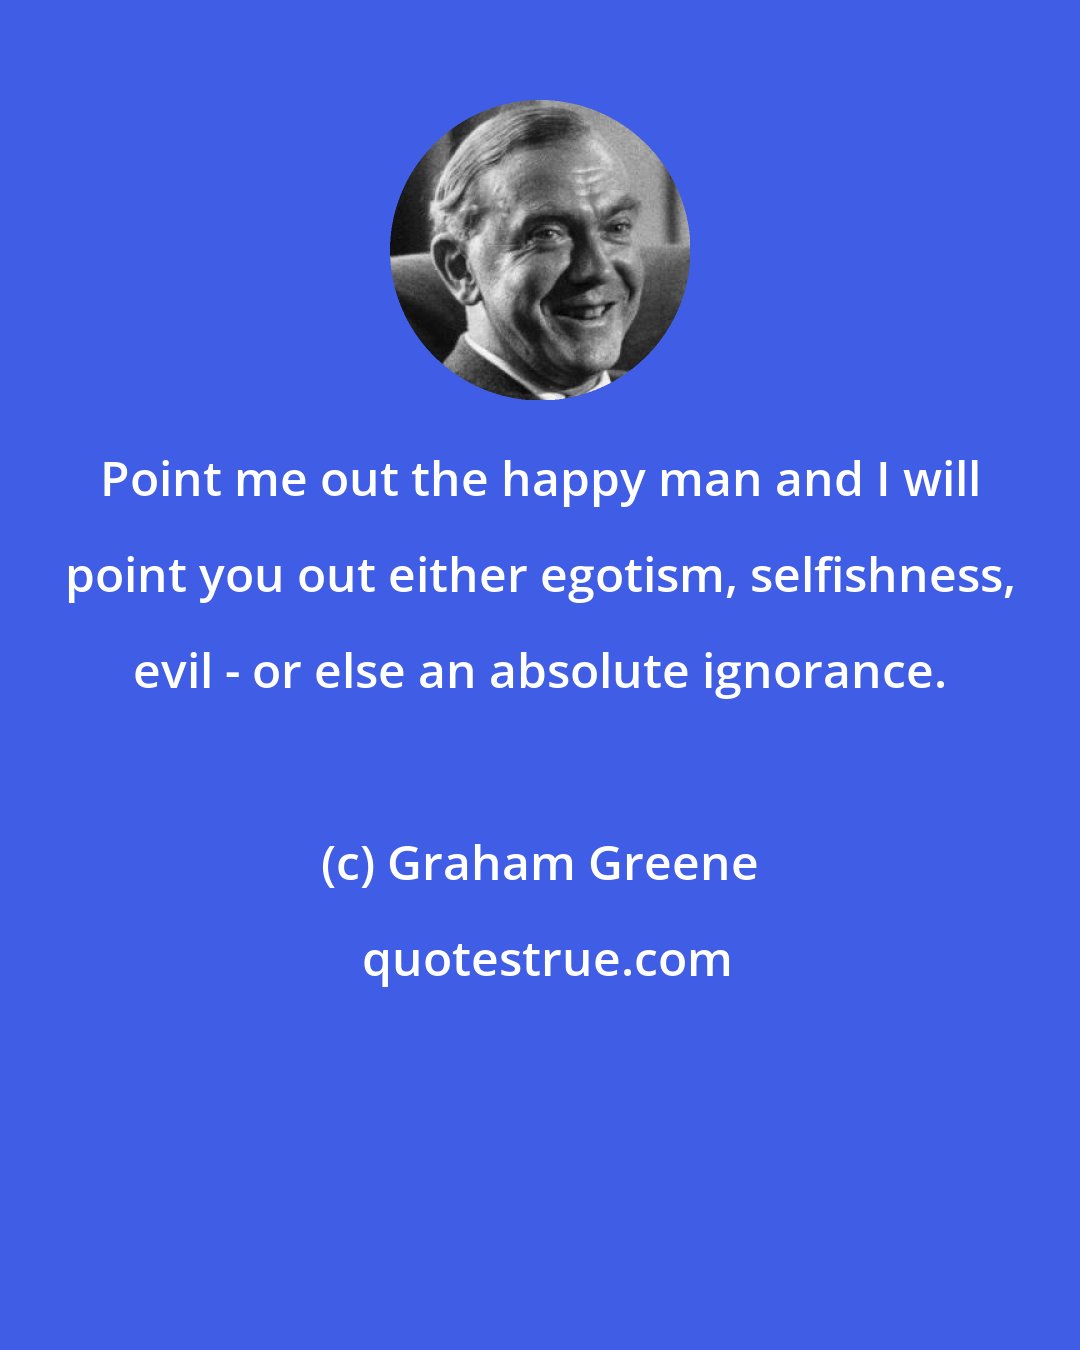 Graham Greene: Point me out the happy man and I will point you out either egotism, selfishness, evil - or else an absolute ignorance.